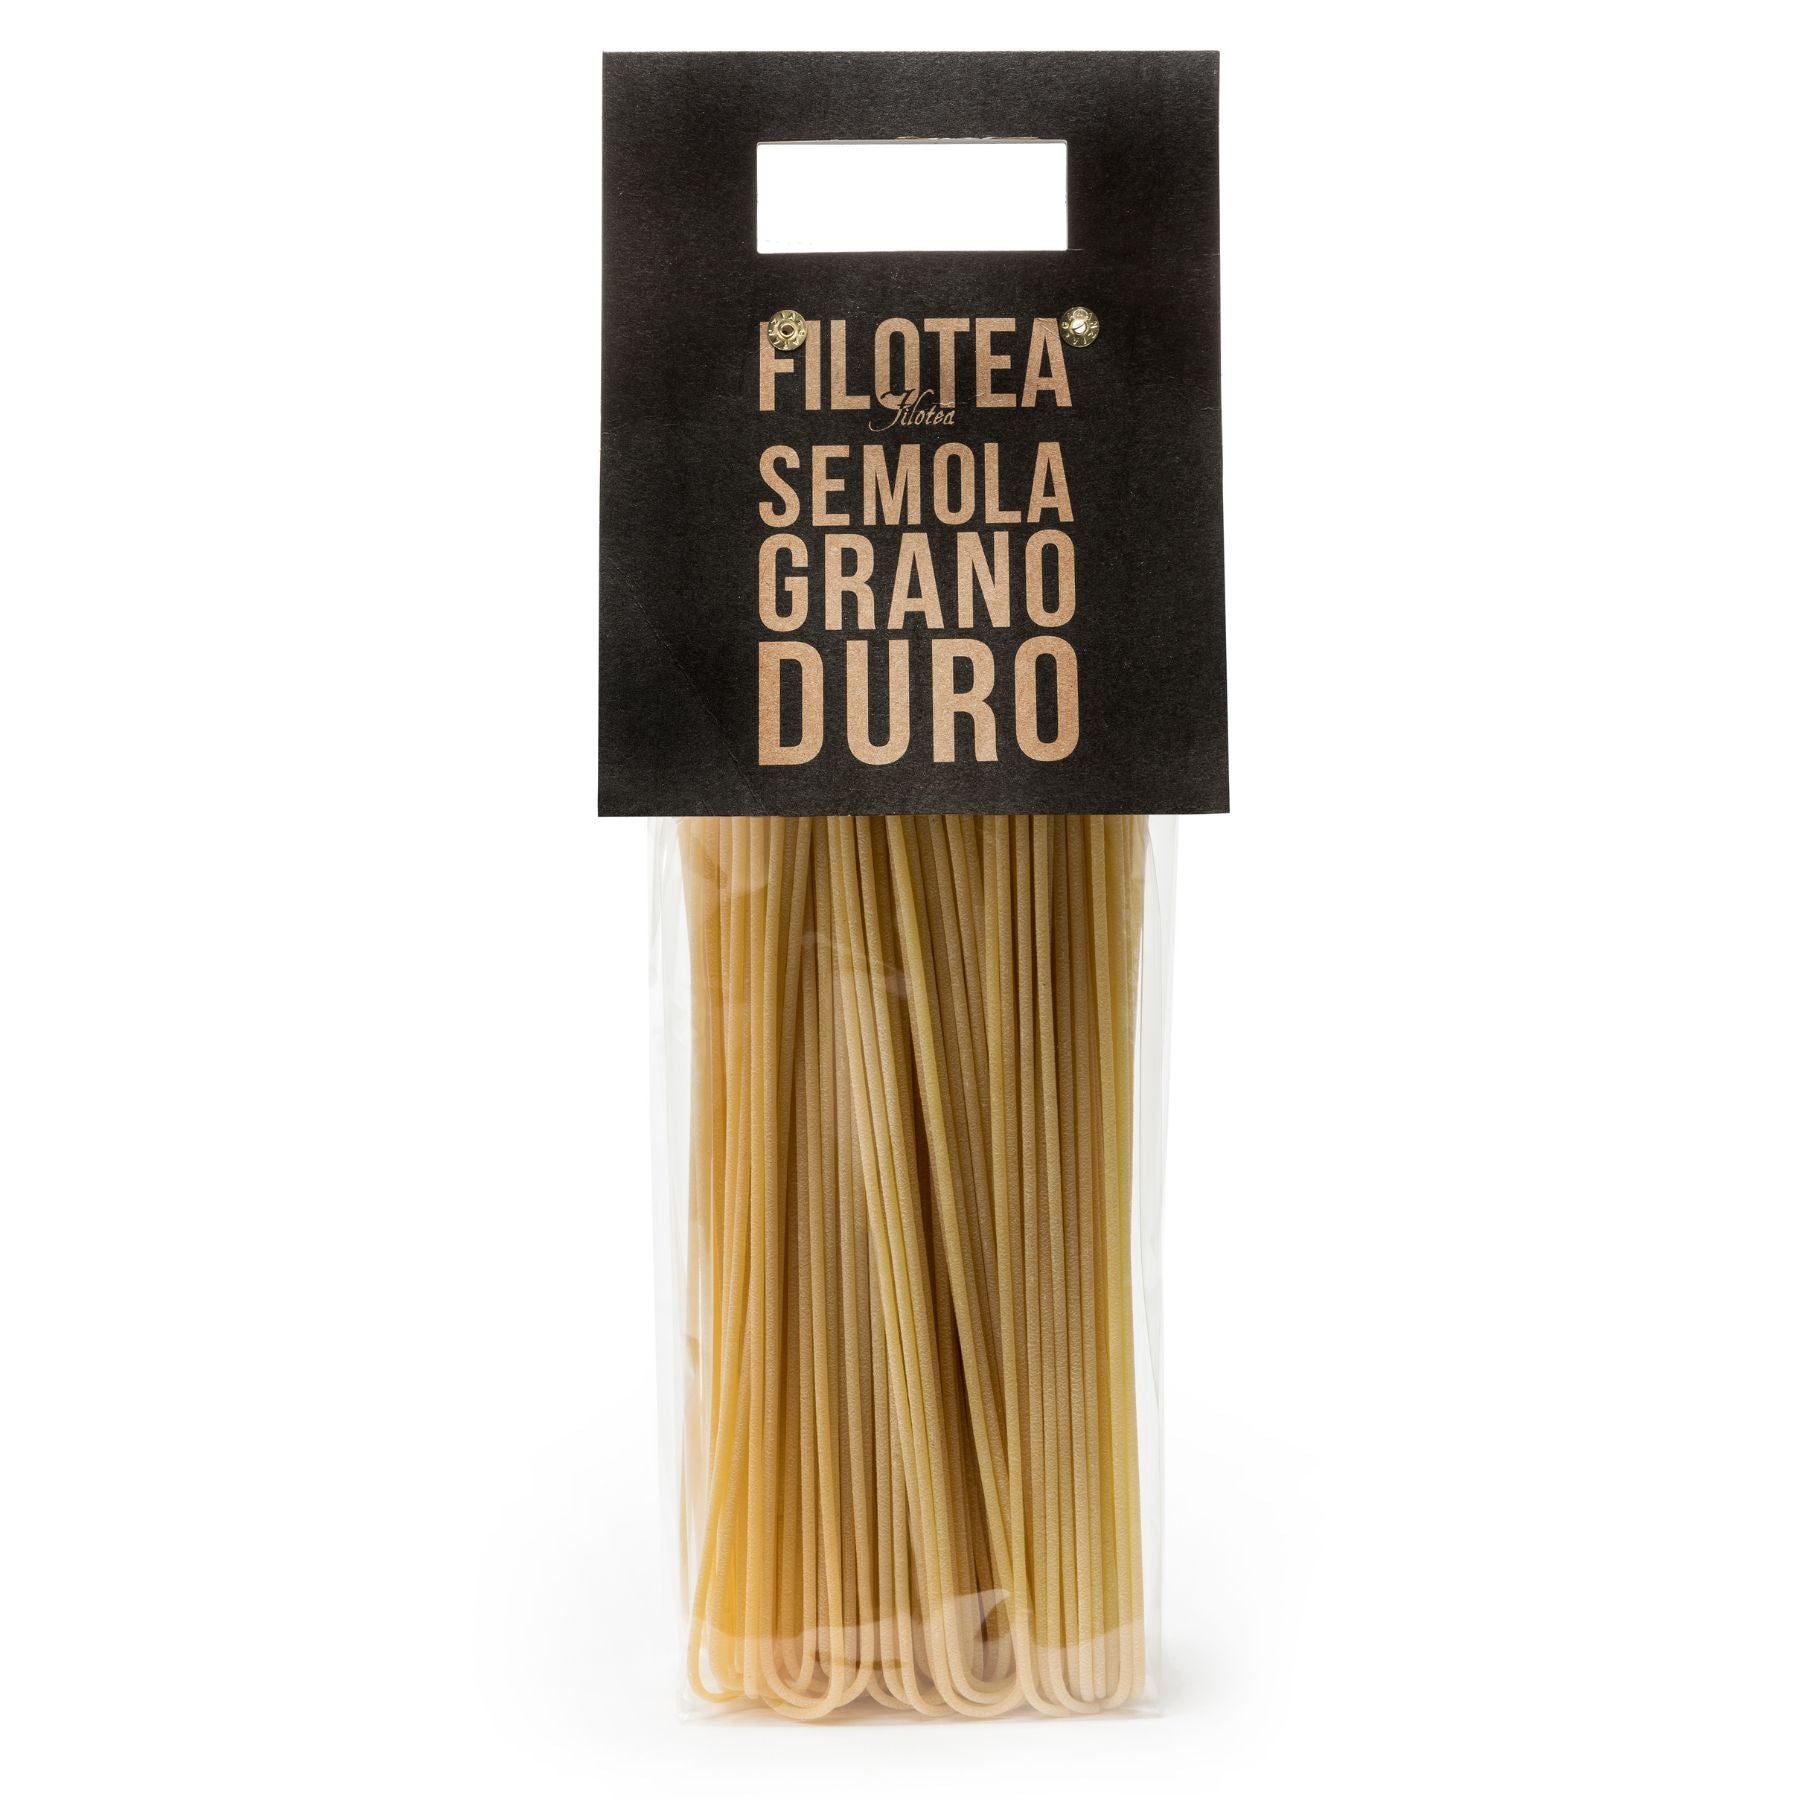 Filotea Spaghettoni Durum Wheat Semolina Pasta 500g | Imported and distributed in the UK by Just Gourmet Foods